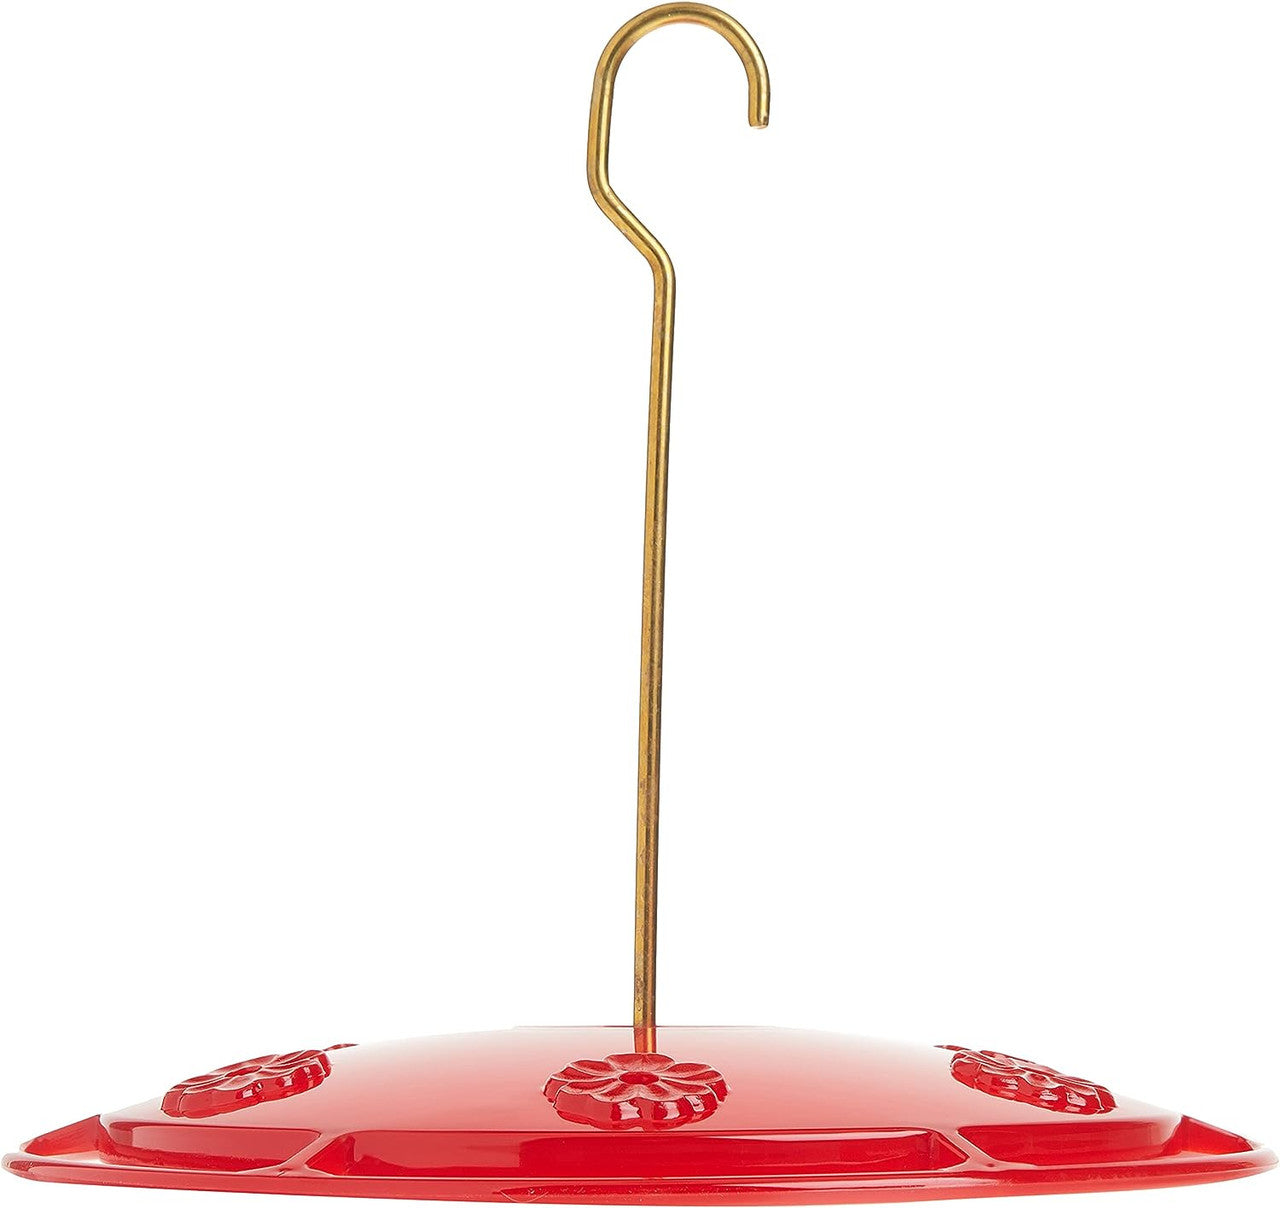 Aspects 143 HummZinger Excel Hanging Hummingbird Feeder with Built in Ant Moat